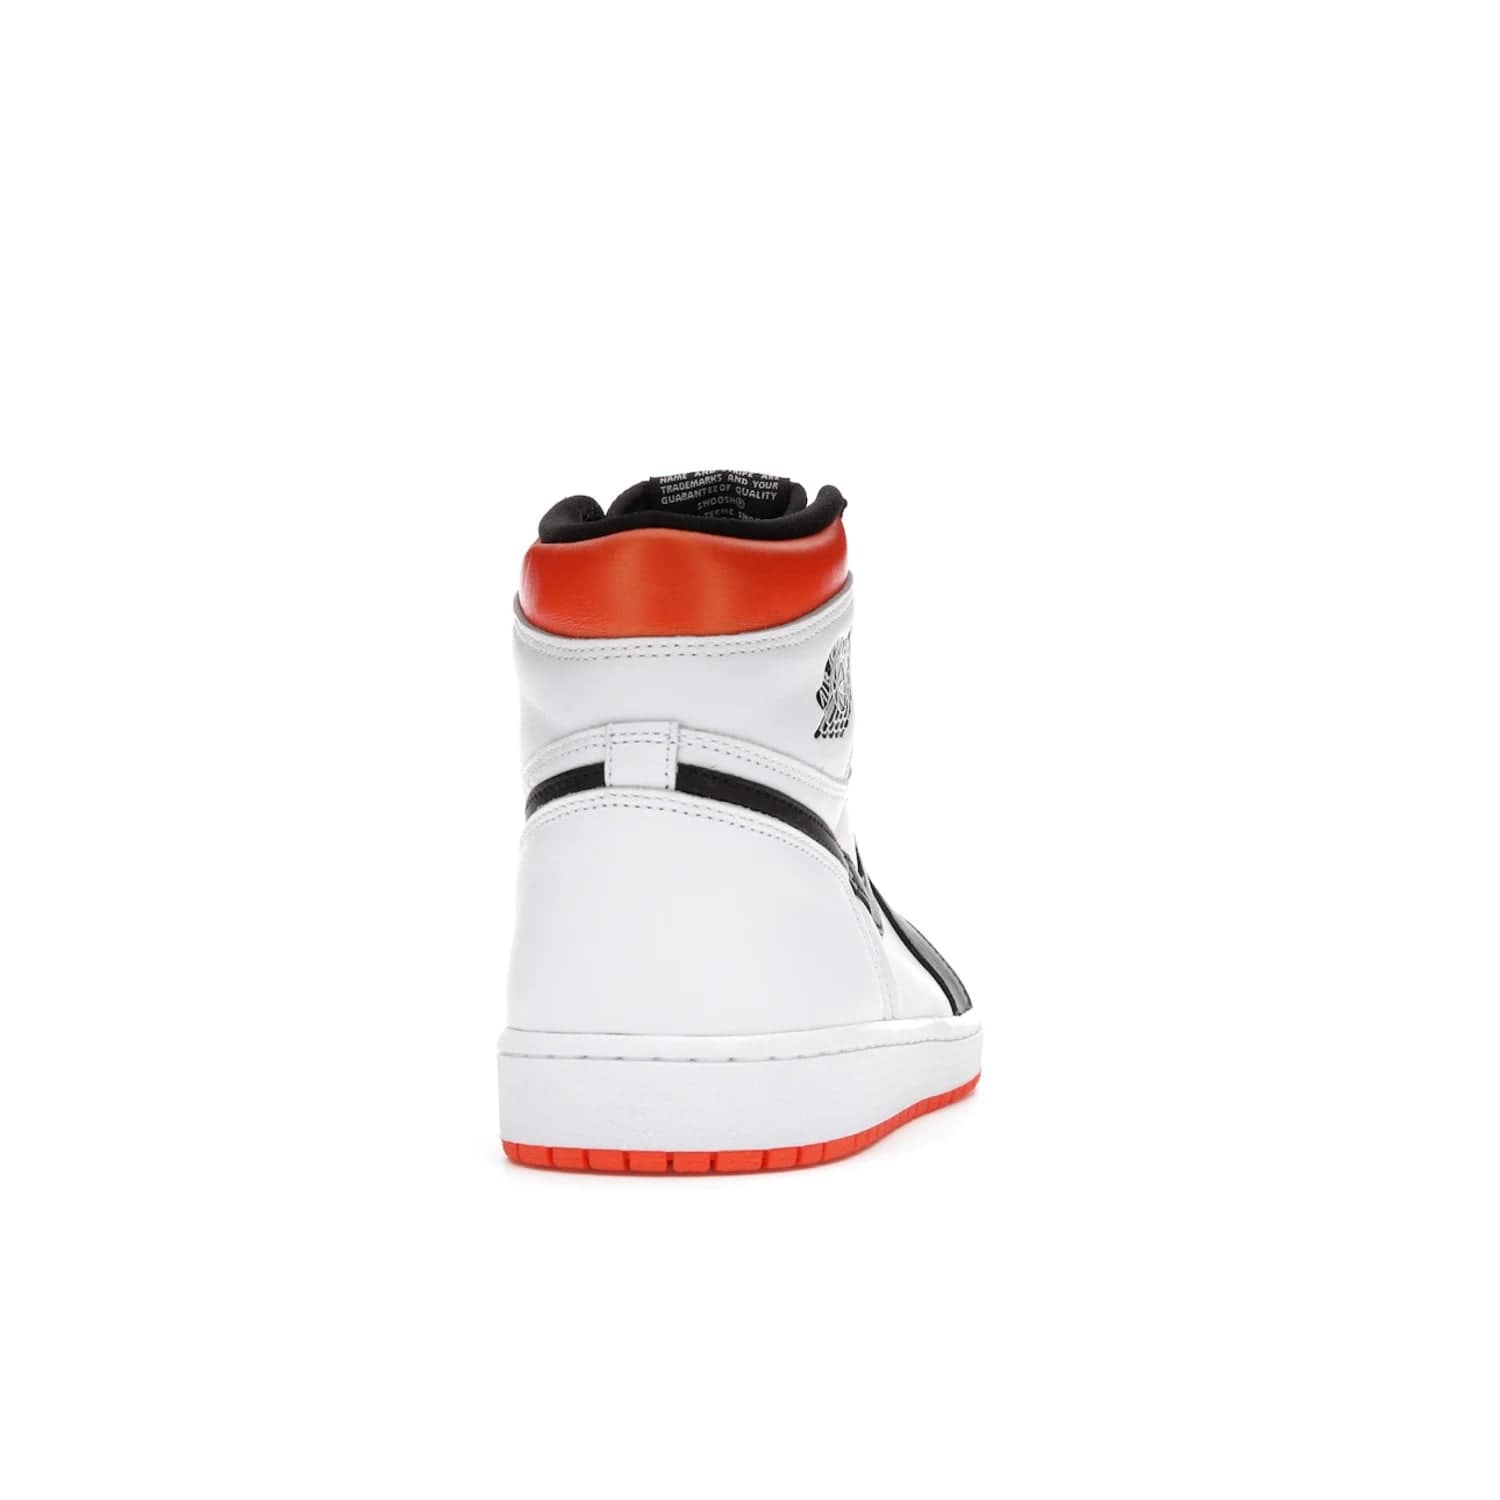 Jordan 1 Retro High Electro Orange - Image 29 - Only at www.BallersClubKickz.com - This Air Jordan 1 Retro High Electro Orange features a white leather upper with black overlays and vibrant Hyper Orange ankle wrap. Turn heads with this iconic design of woven tongue label and sole. Get yours today and add some serious style to your rotation.